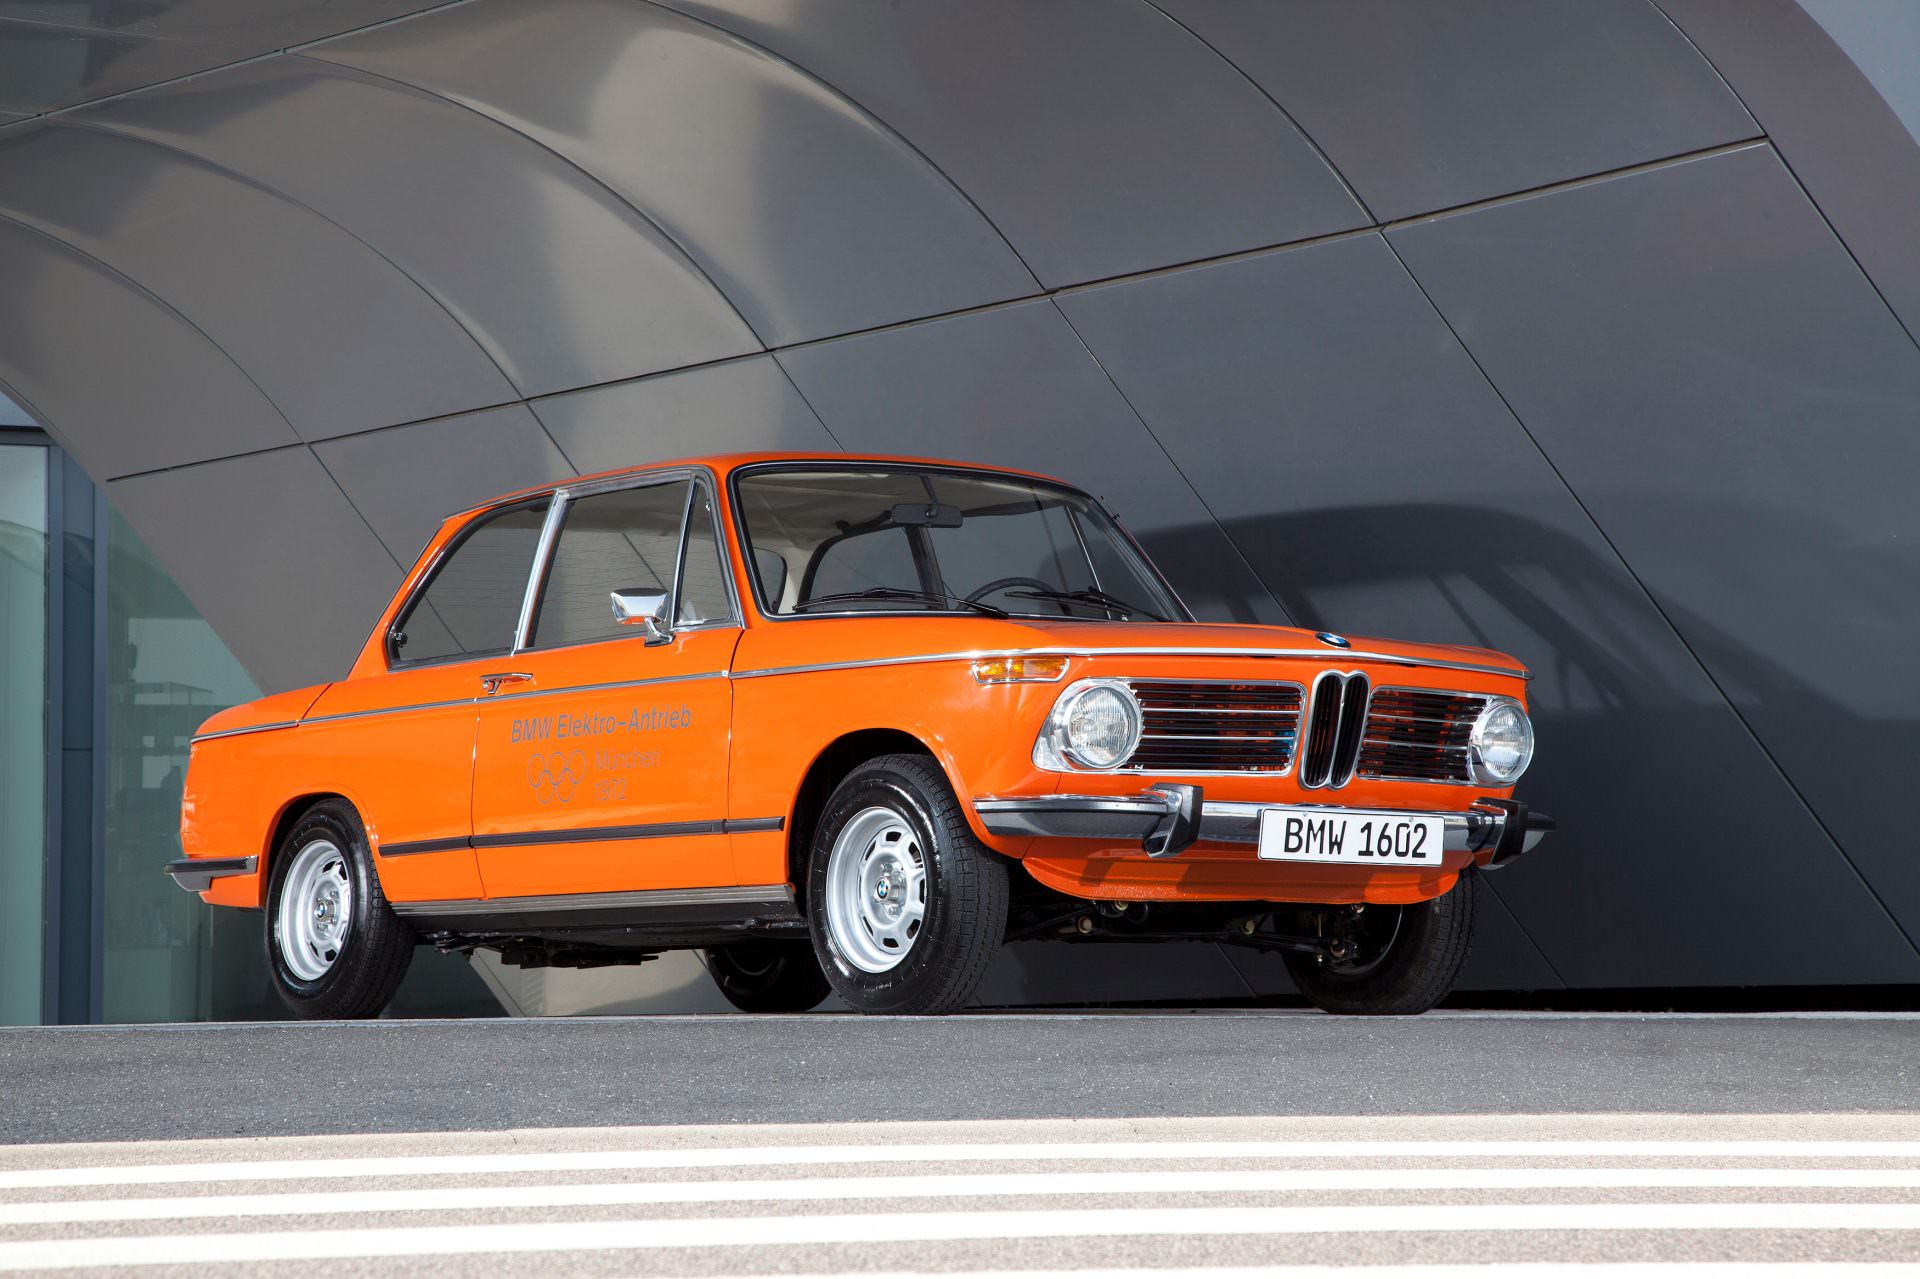 An orange BMW 1602 electric vehicle from 1972 is displayed in a modern setting with curved white walls. The car has a classic, boxy design typical of 1970s sedans, with round headlights and a distinctive BMW kidney grille.